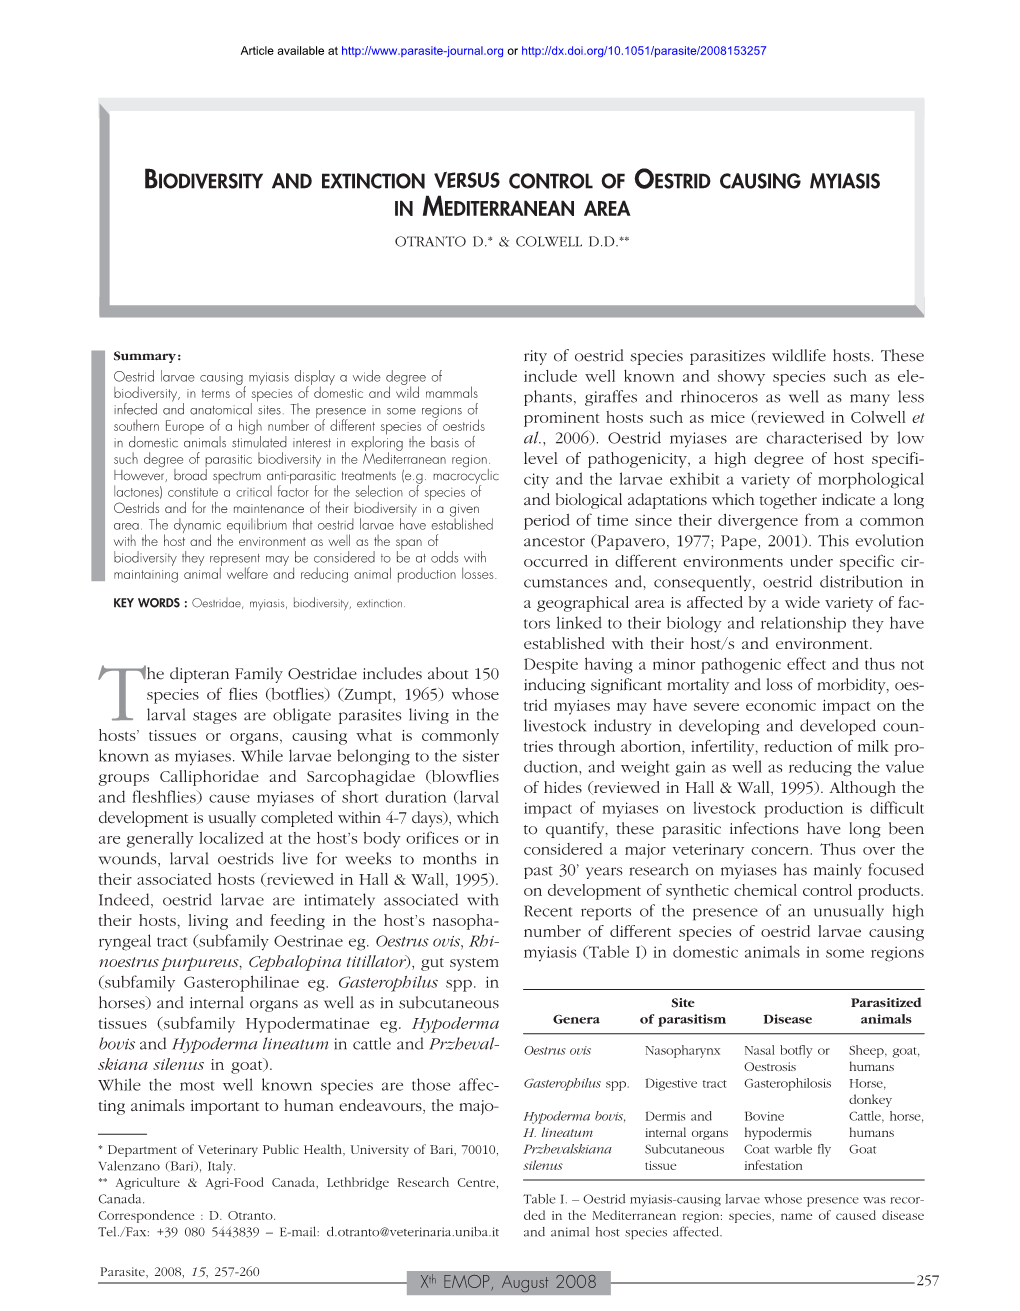 Biodiversity and Extinction Versus Control of Oestrid Causing Myiasis in Mediterranean Area Otranto D.* & Colwell D.D.**